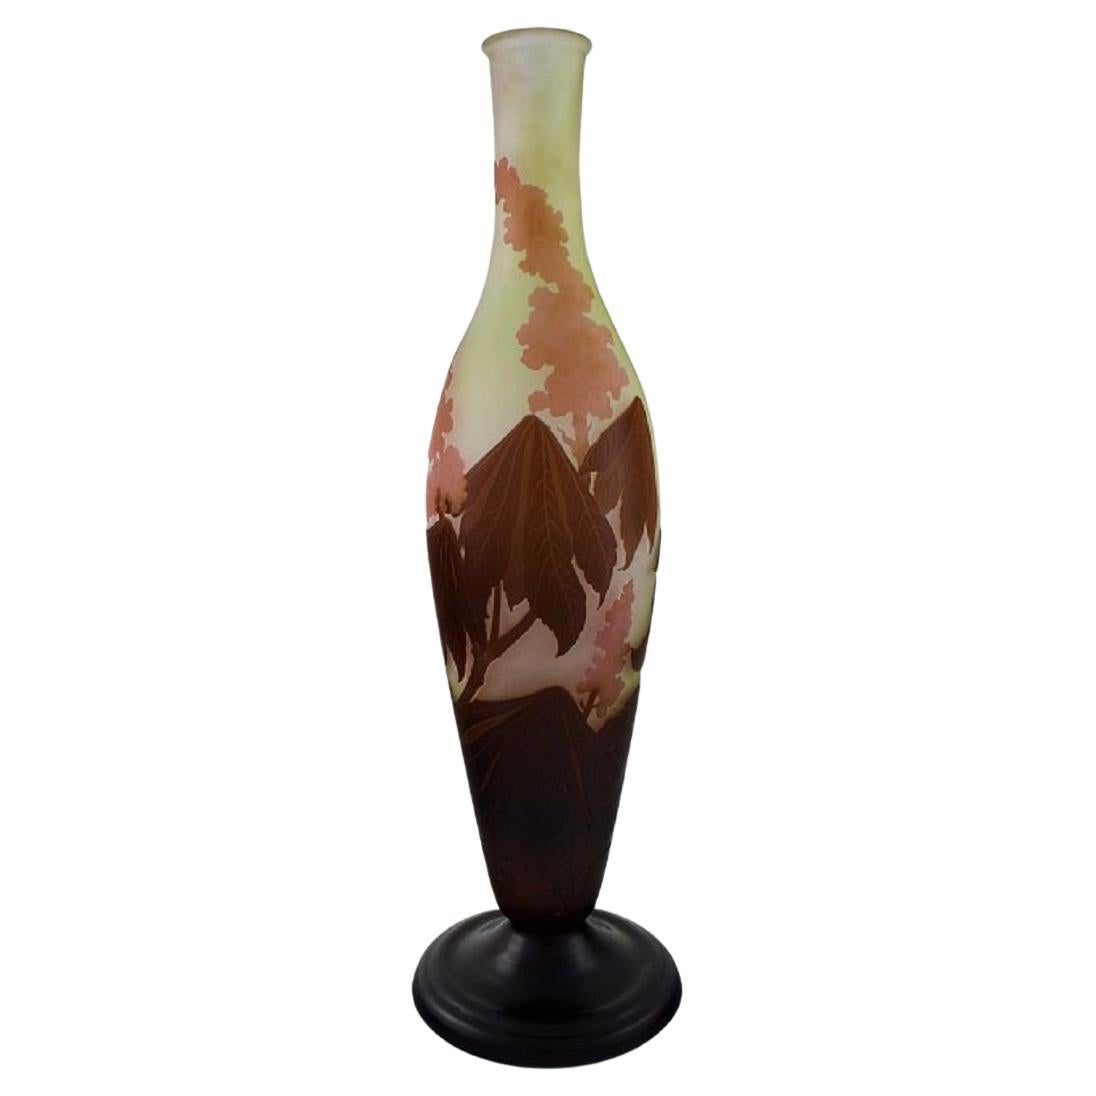 Colossal Antique Emile Gallé "Ricin" Vase in Frosted Art Glass